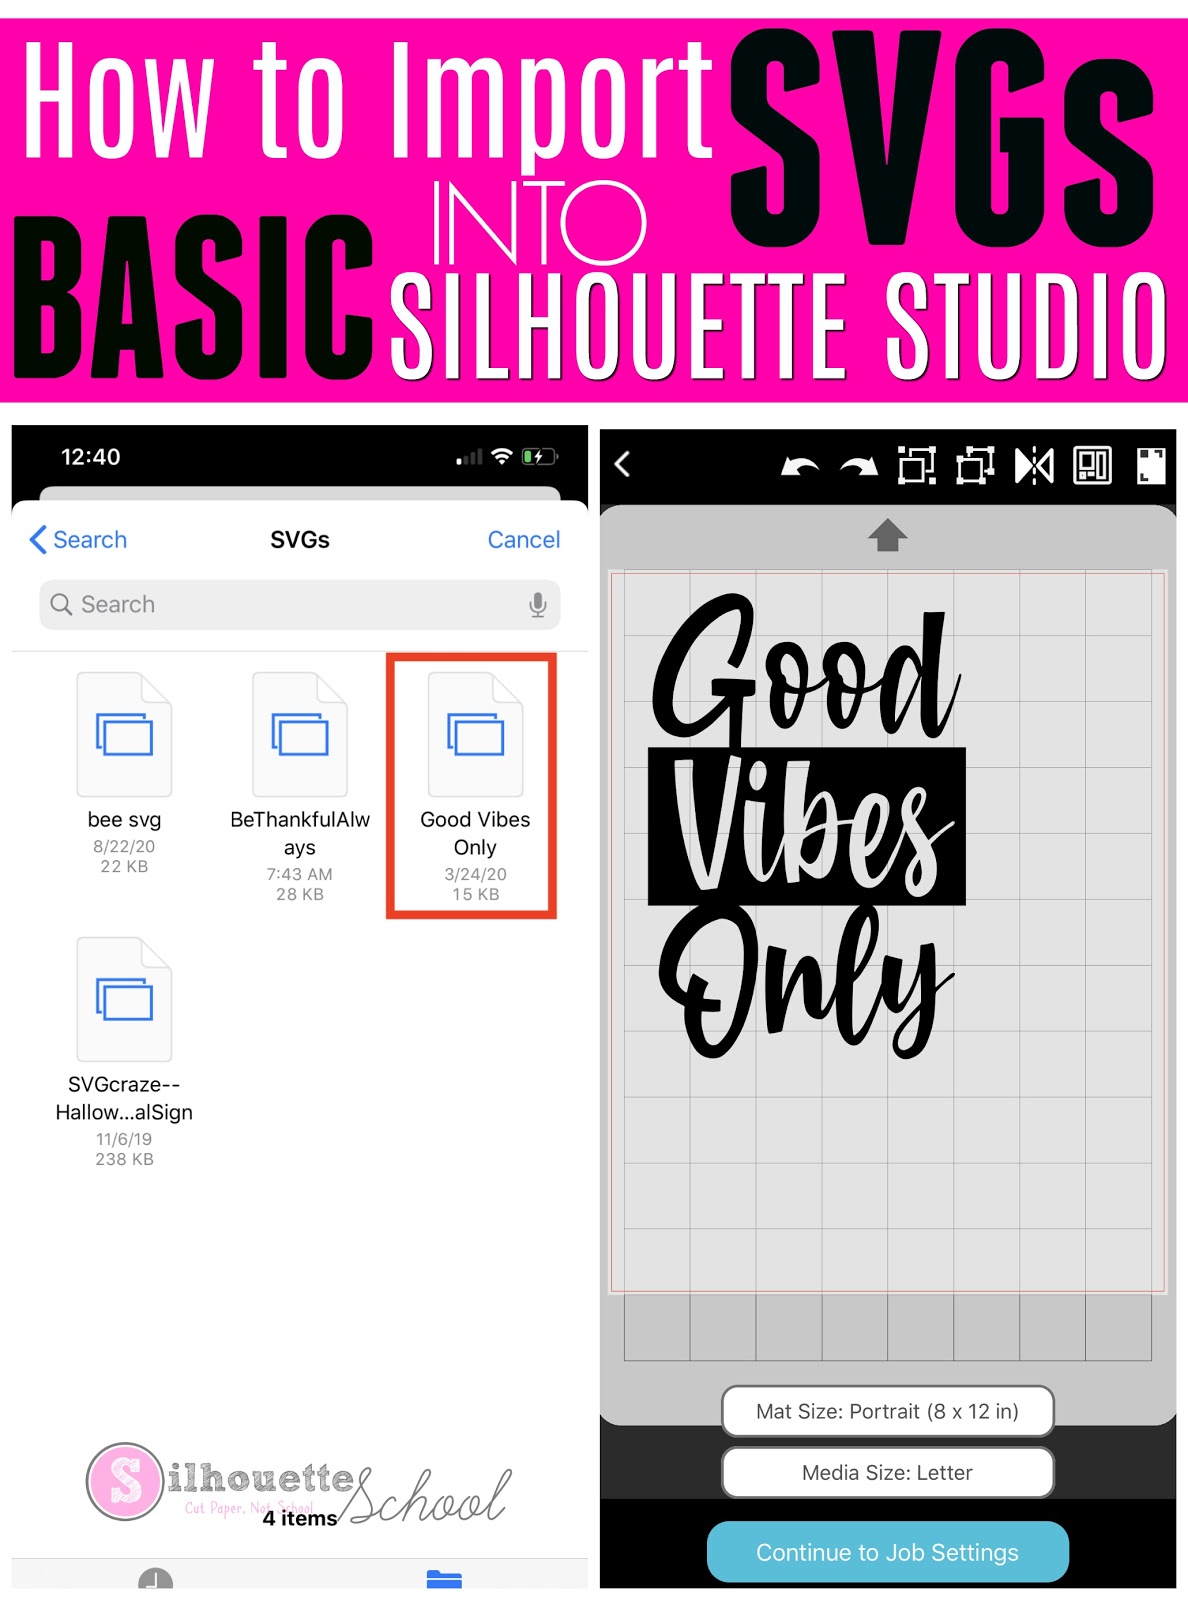 Download How to Import SVGs into Silhouette Studio Basic Edition - Silhouette School